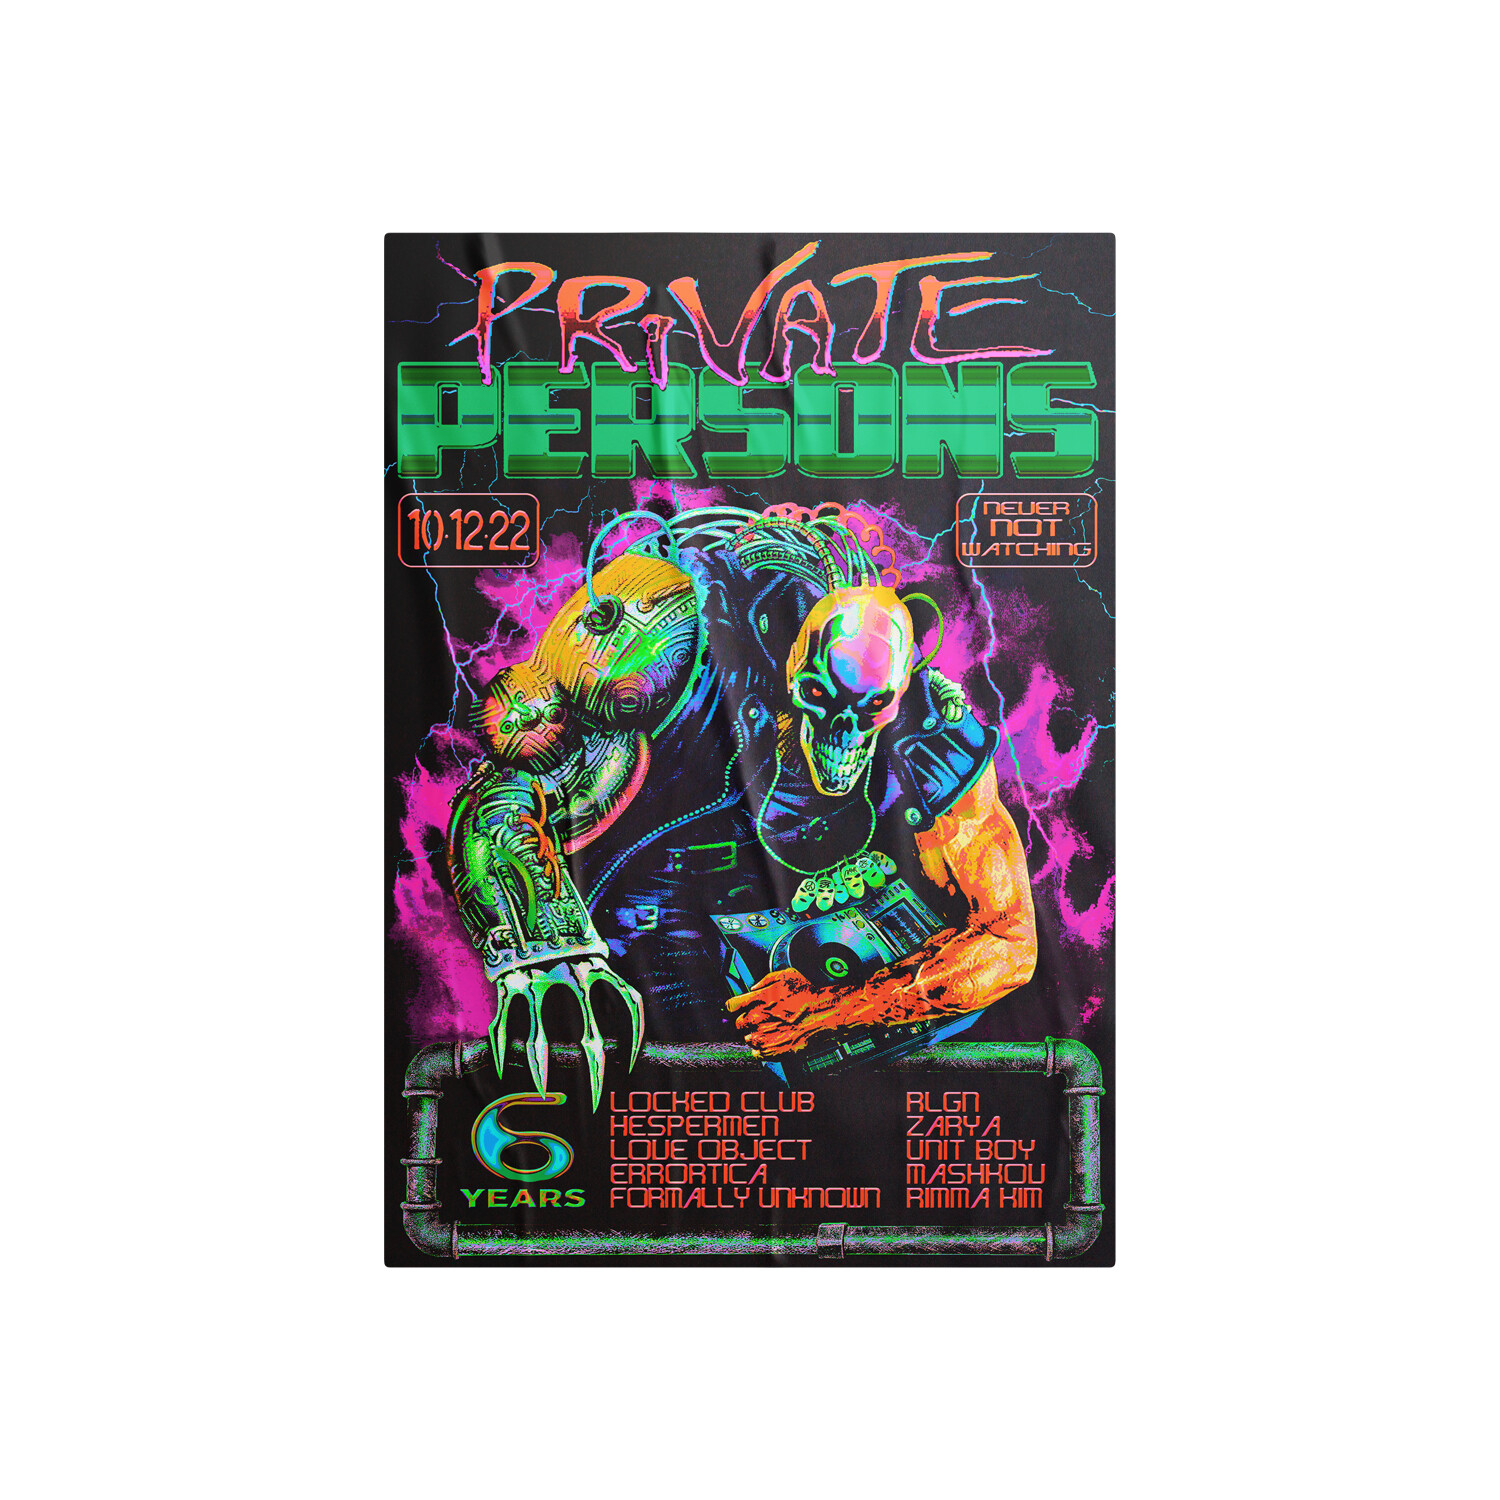 PRIVATE PERSONS "6 YEARS" POSTER